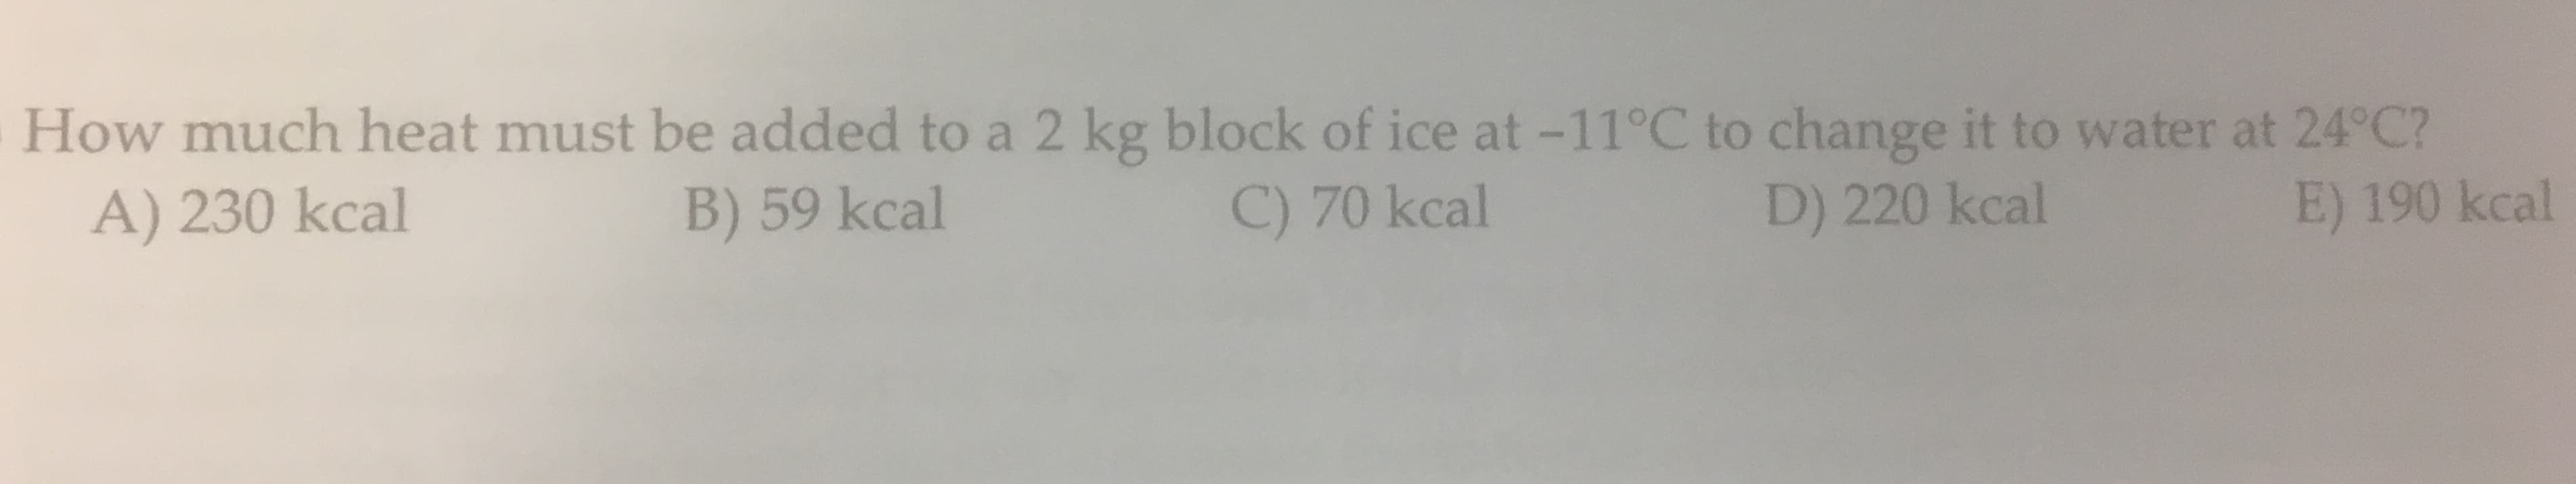 How much heat must be added to a 2 kg block of ice at -11°C to change it to water at 24°C?
A) 230 kcal
B) 59 kcal
C) 70 kcal
D) 220 kcal
E) 190 kcal
